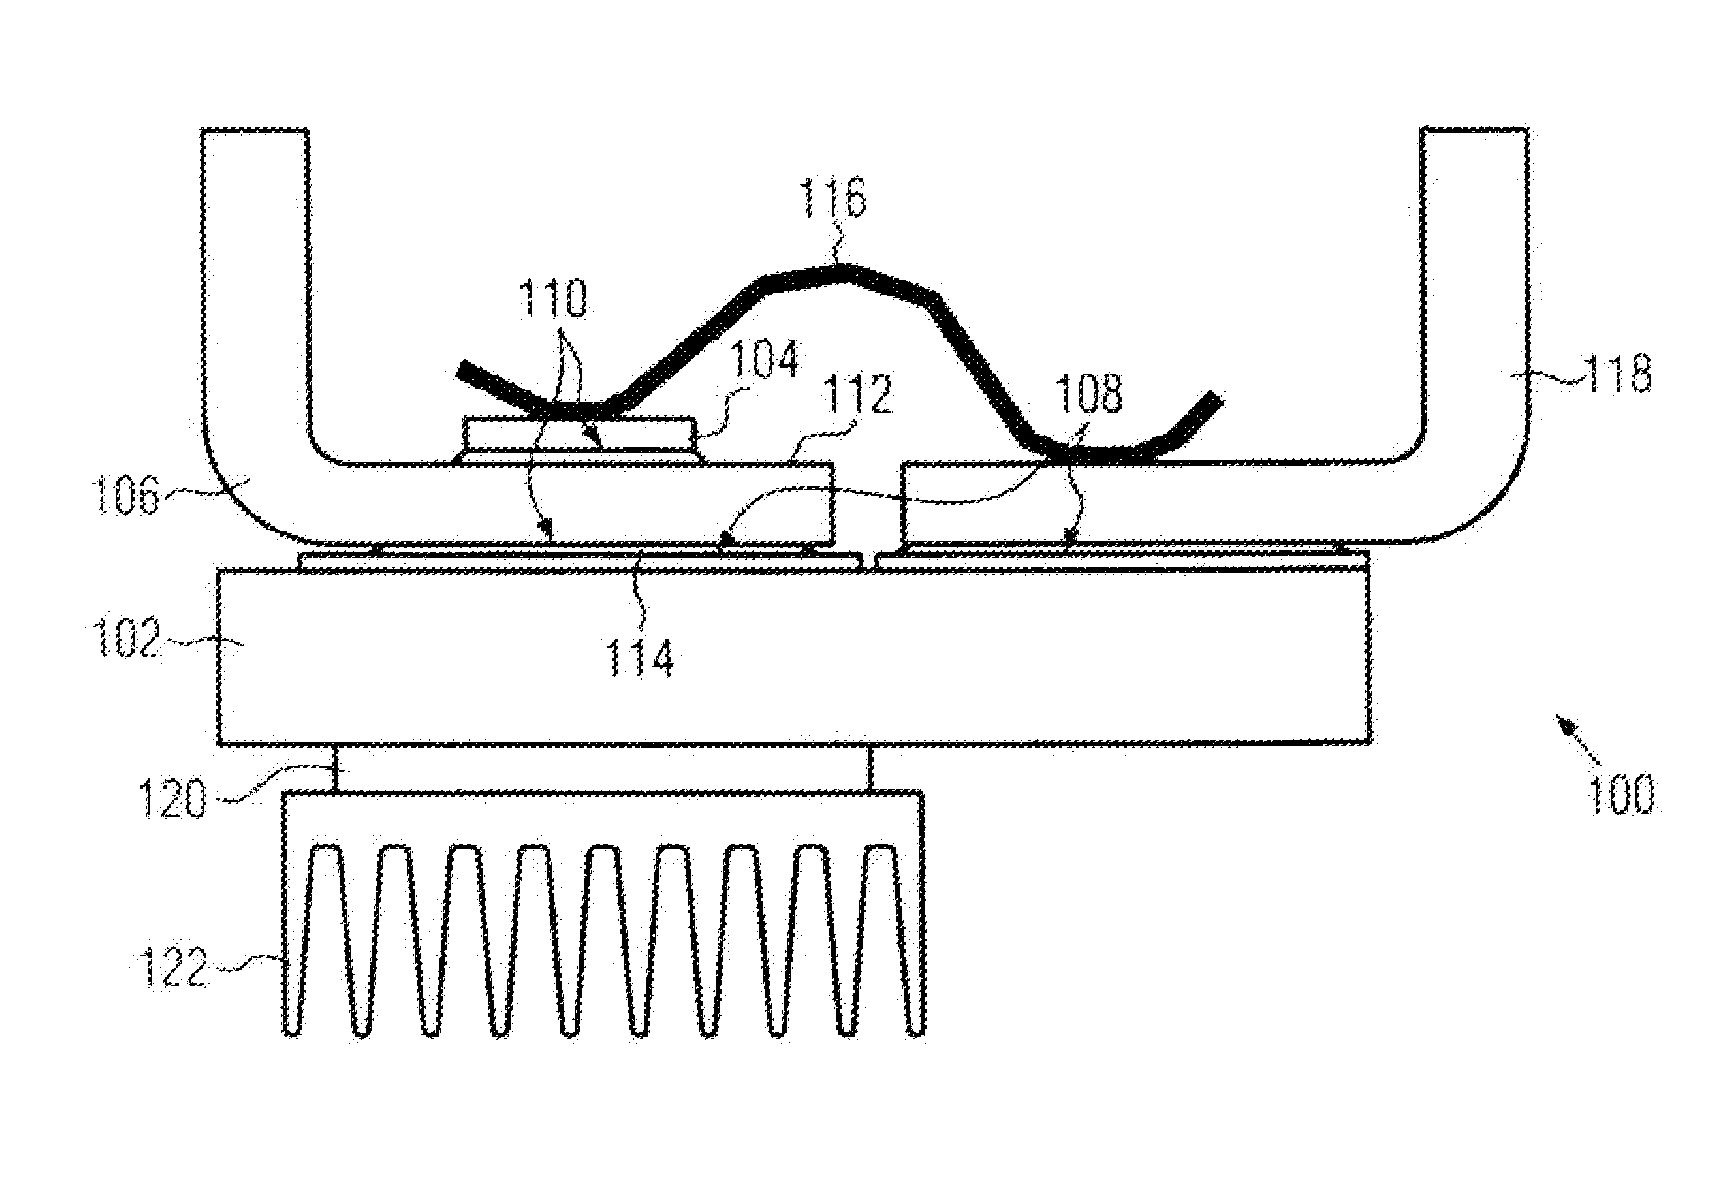 Power semiconductor module having sintered metal connections, preferably sintered silver connections, and production method